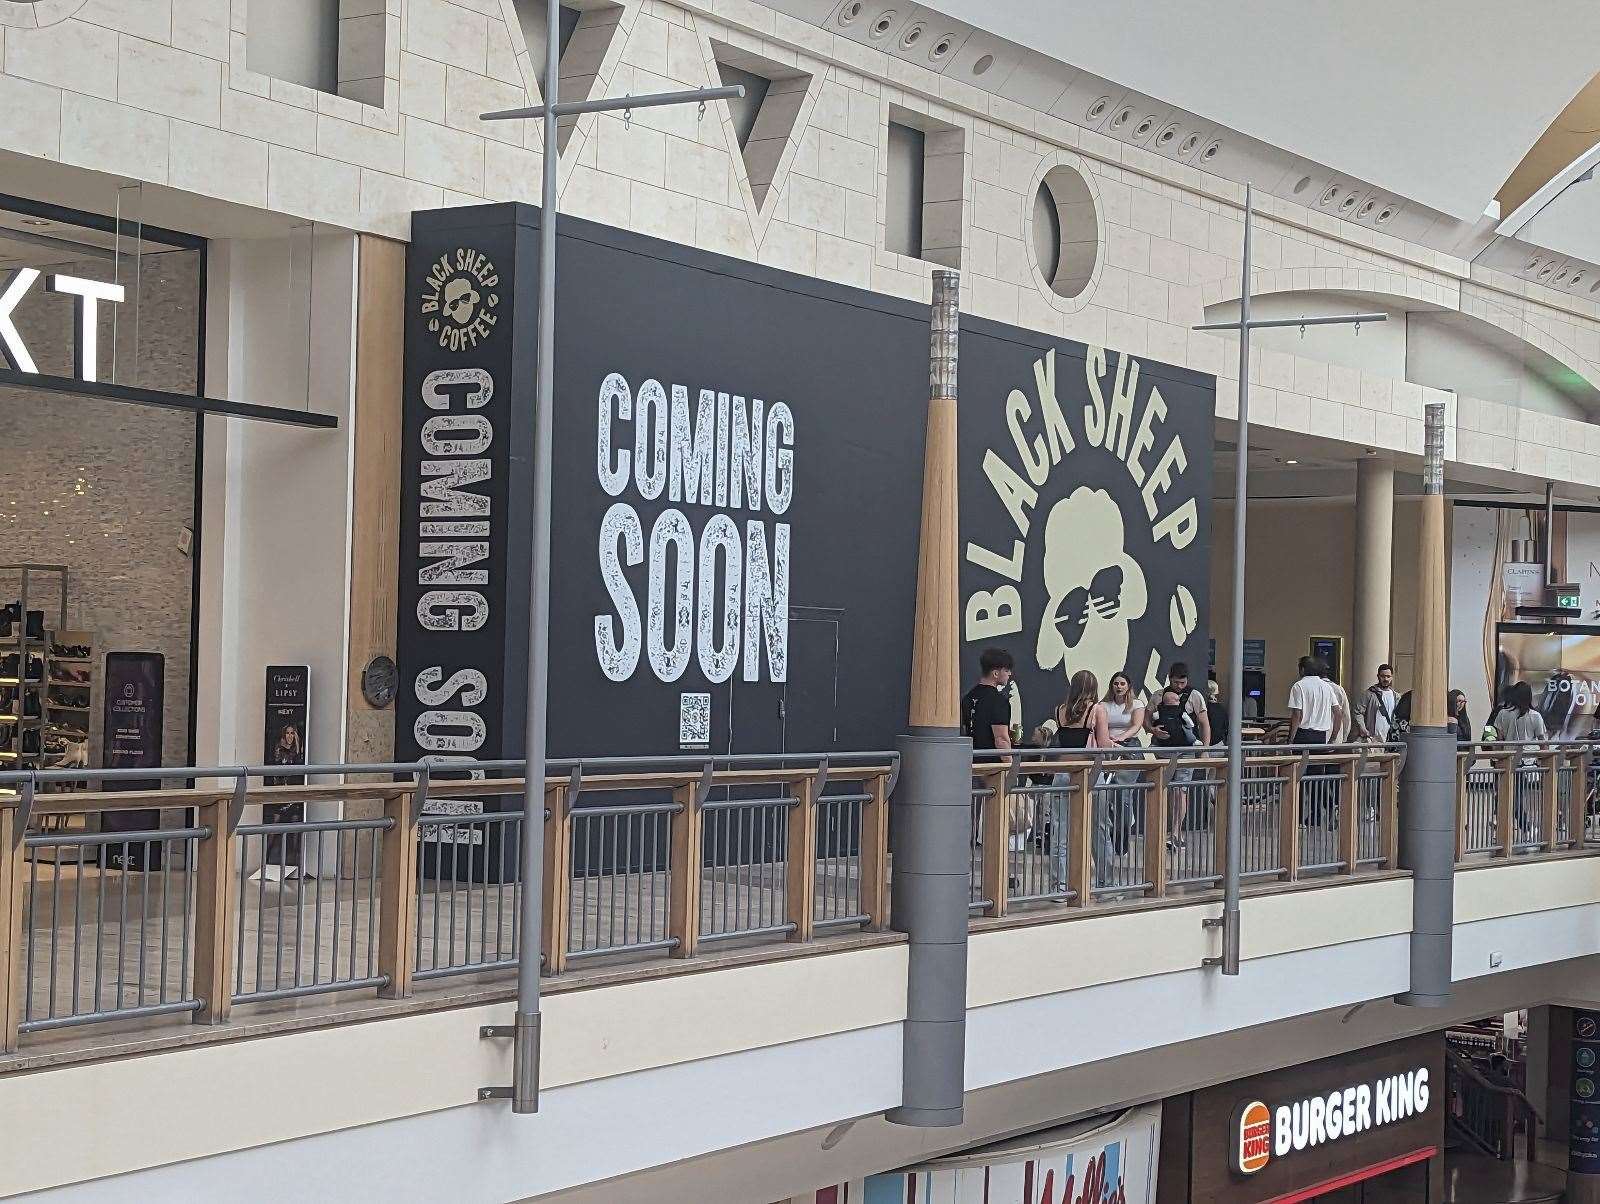 Black Sheep Coffee will be opening a branch in Bluewater